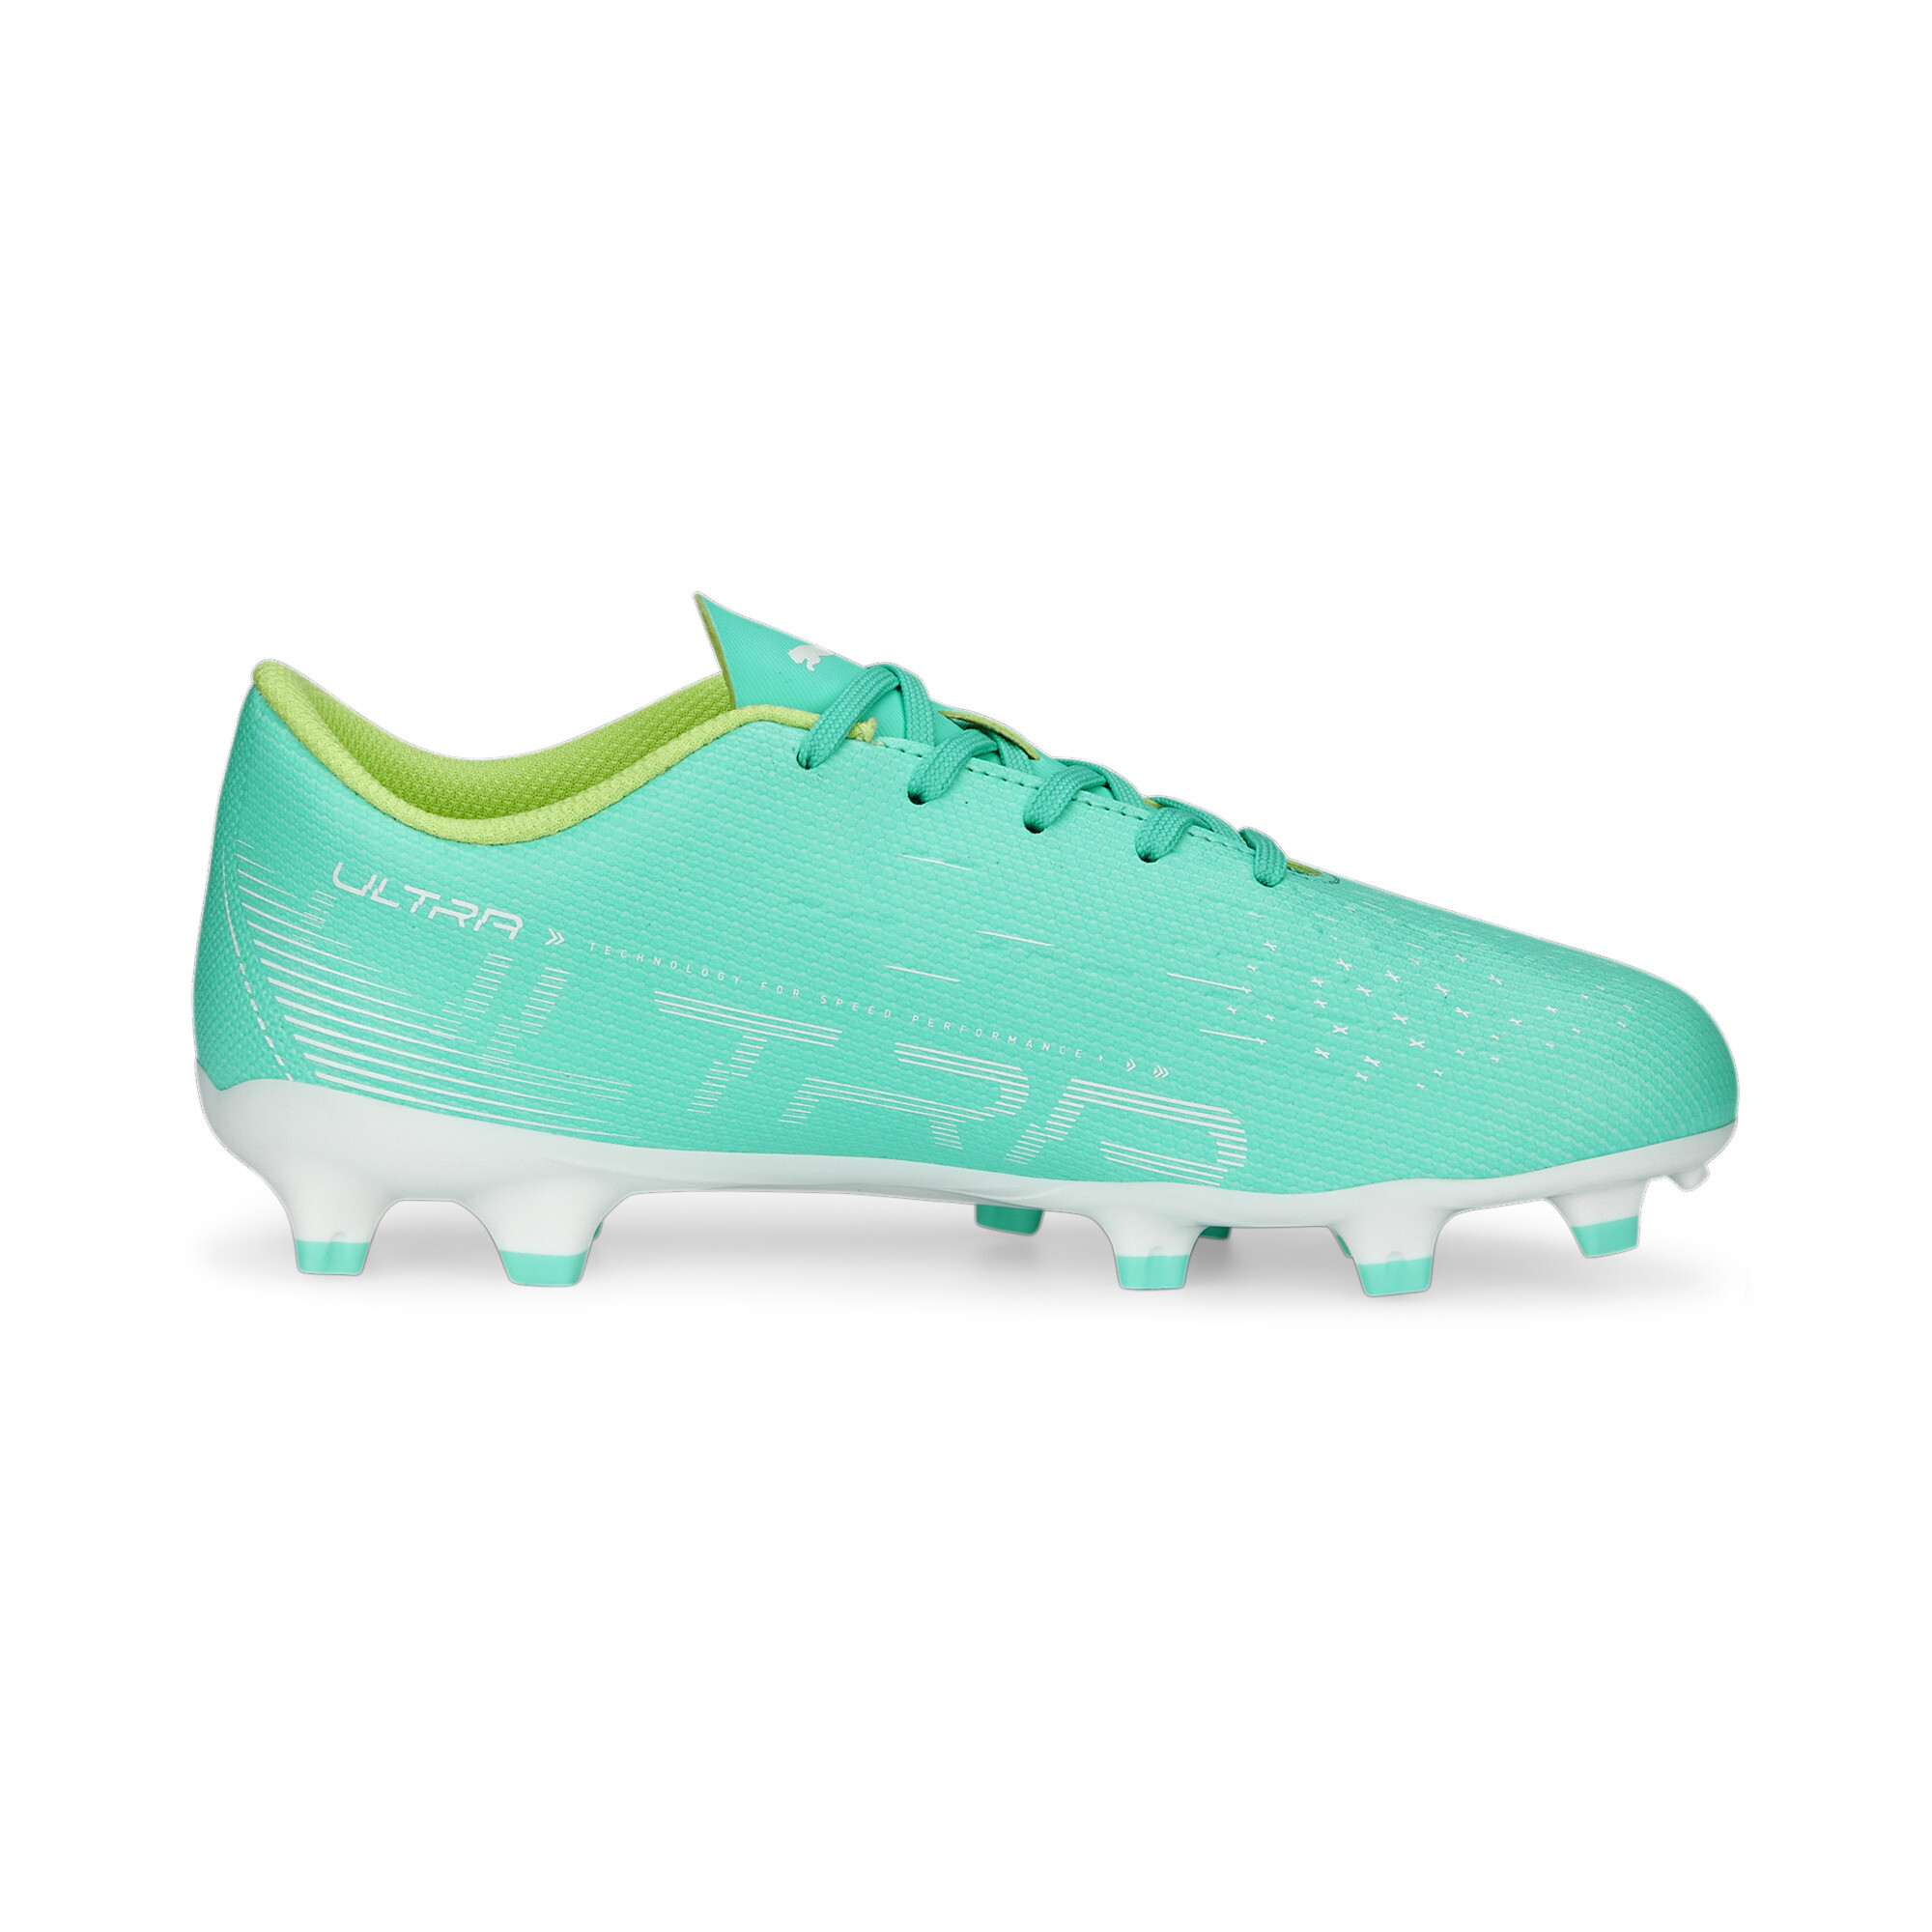 PUMA ULTRA Play FG/AG Football Boots Youth In 40 - Green, Size EU 27